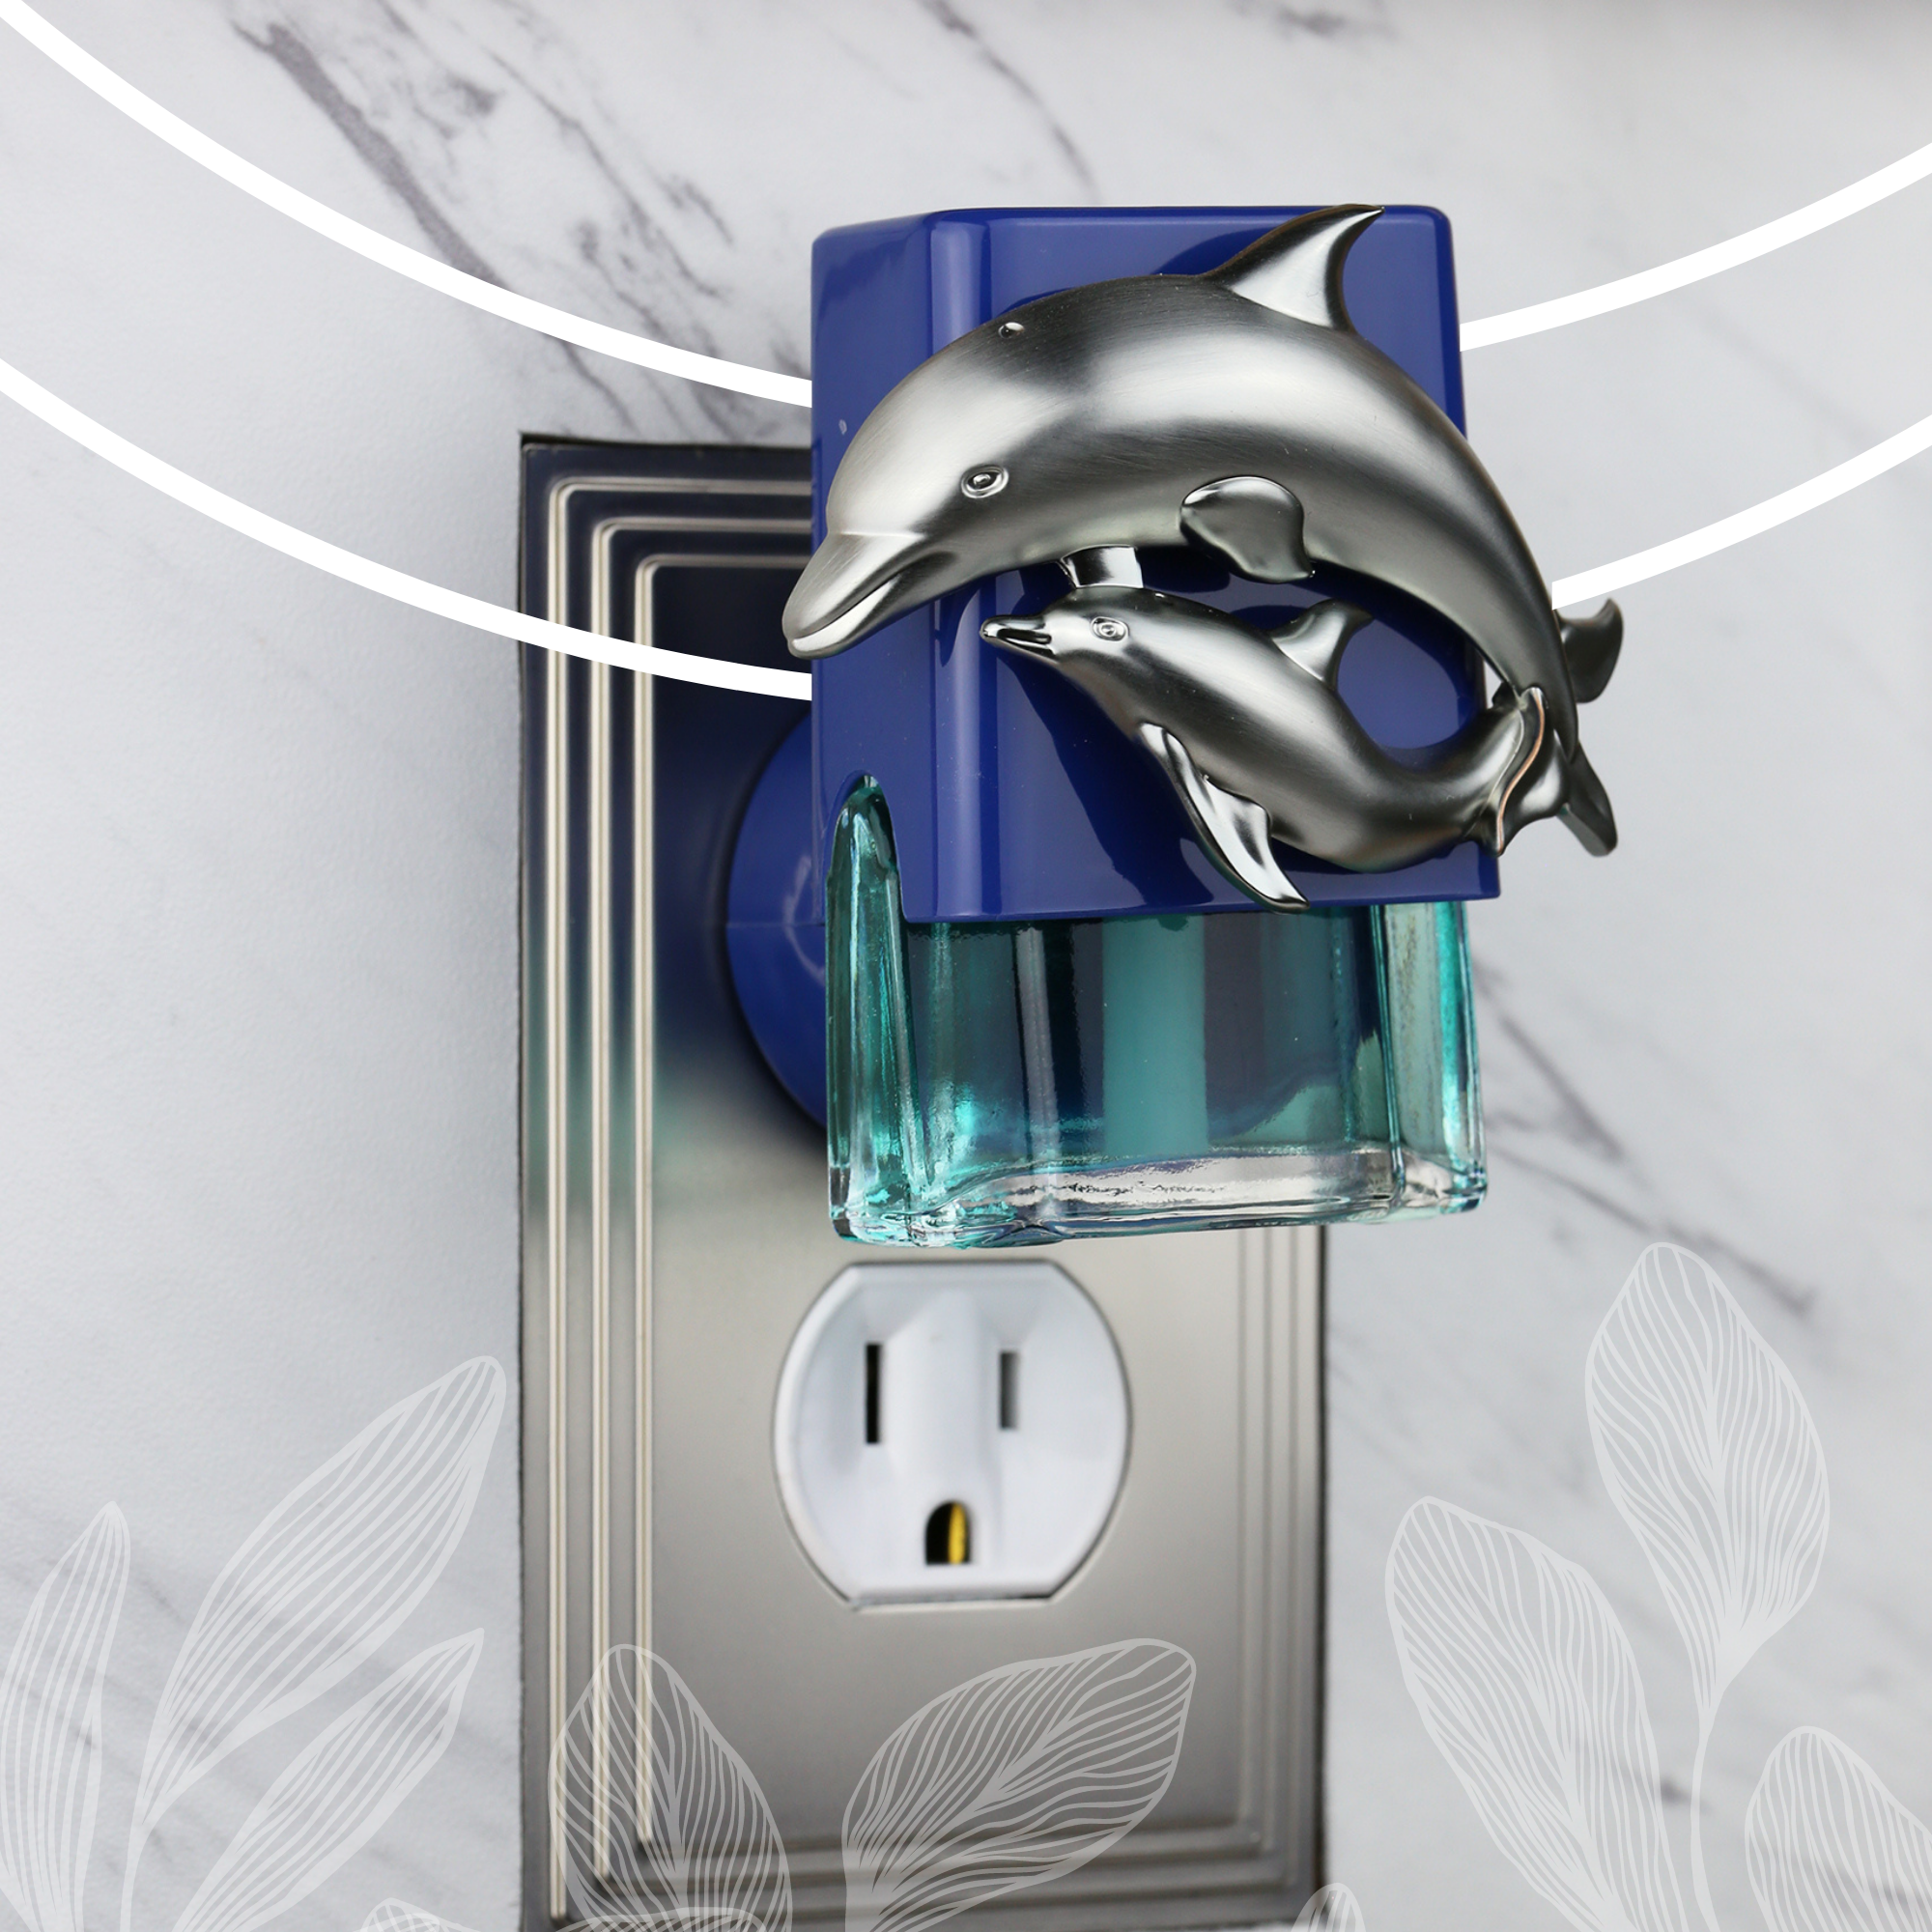 Platinum Dolphin Plugables® Aromalectric® Scented Oil Diffuser  Home Fragrance Accessories